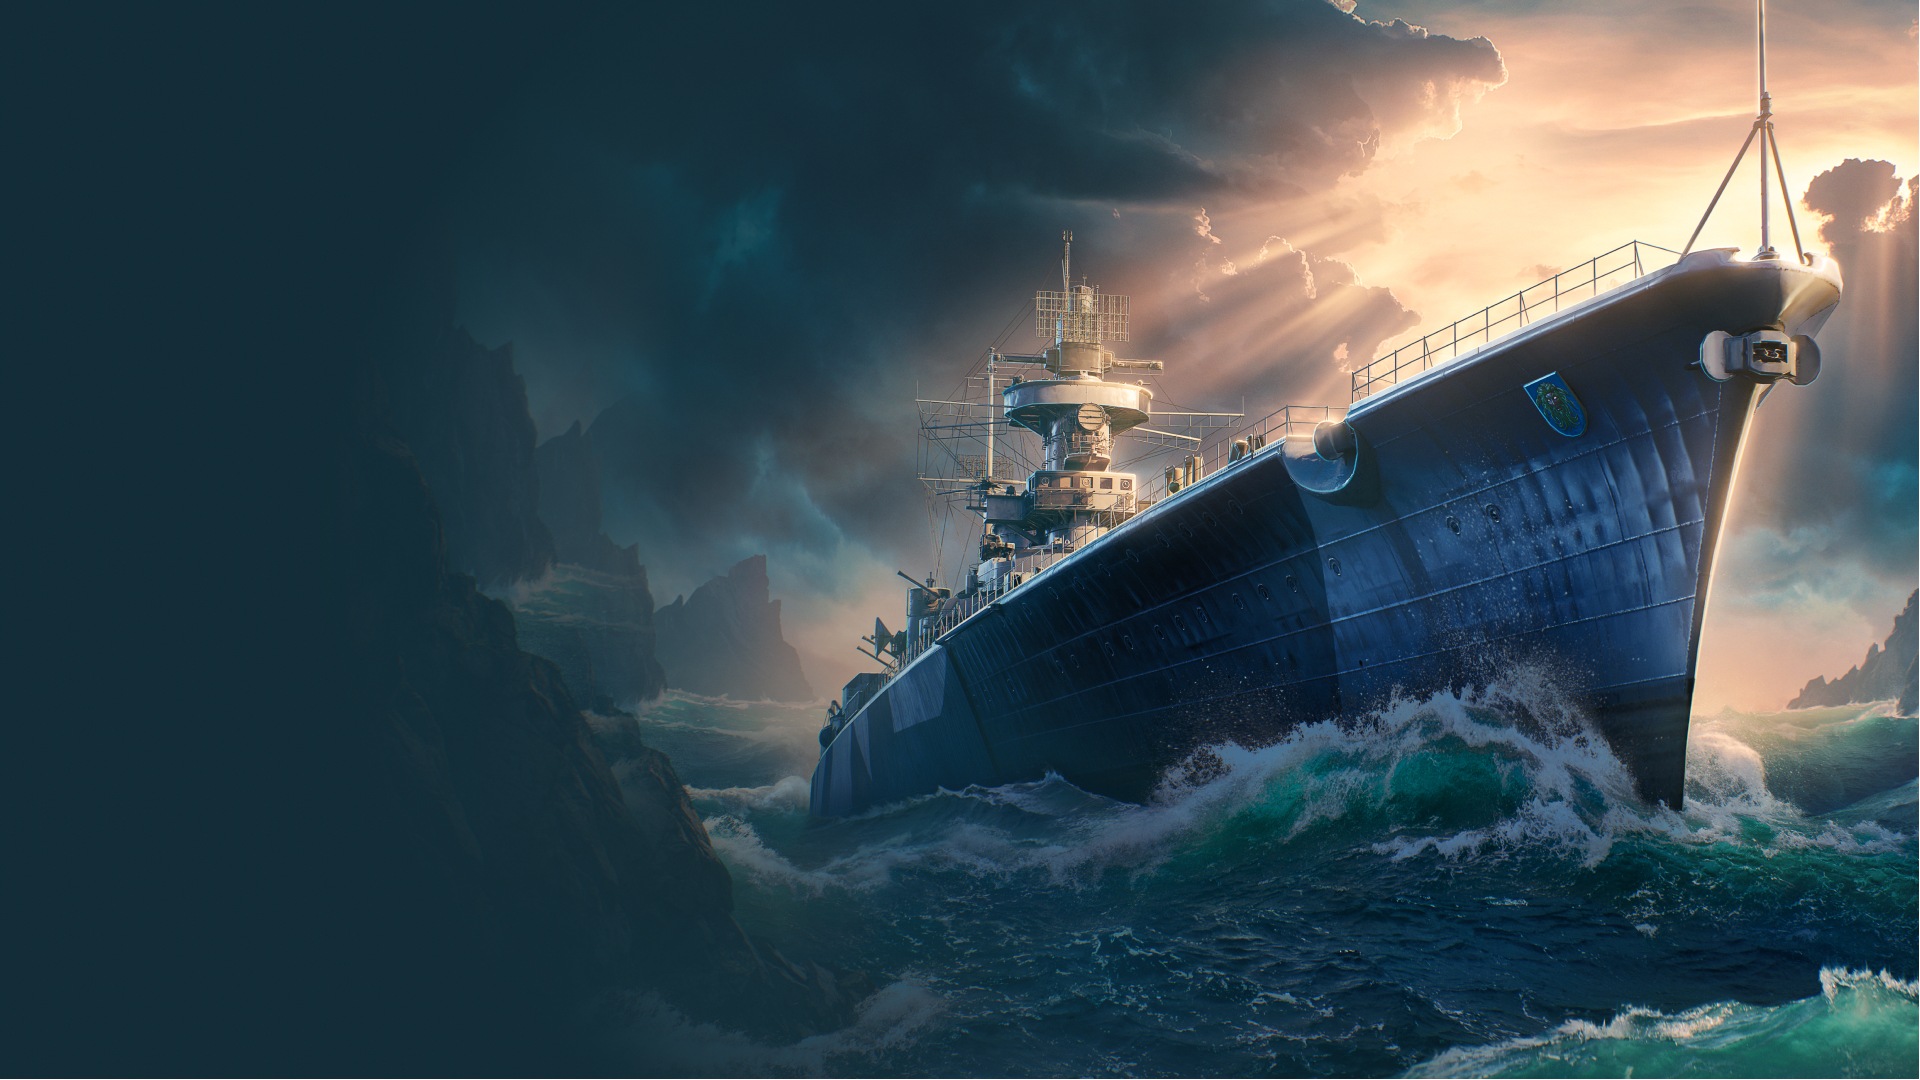 World of Warships: Legends - Game Overview